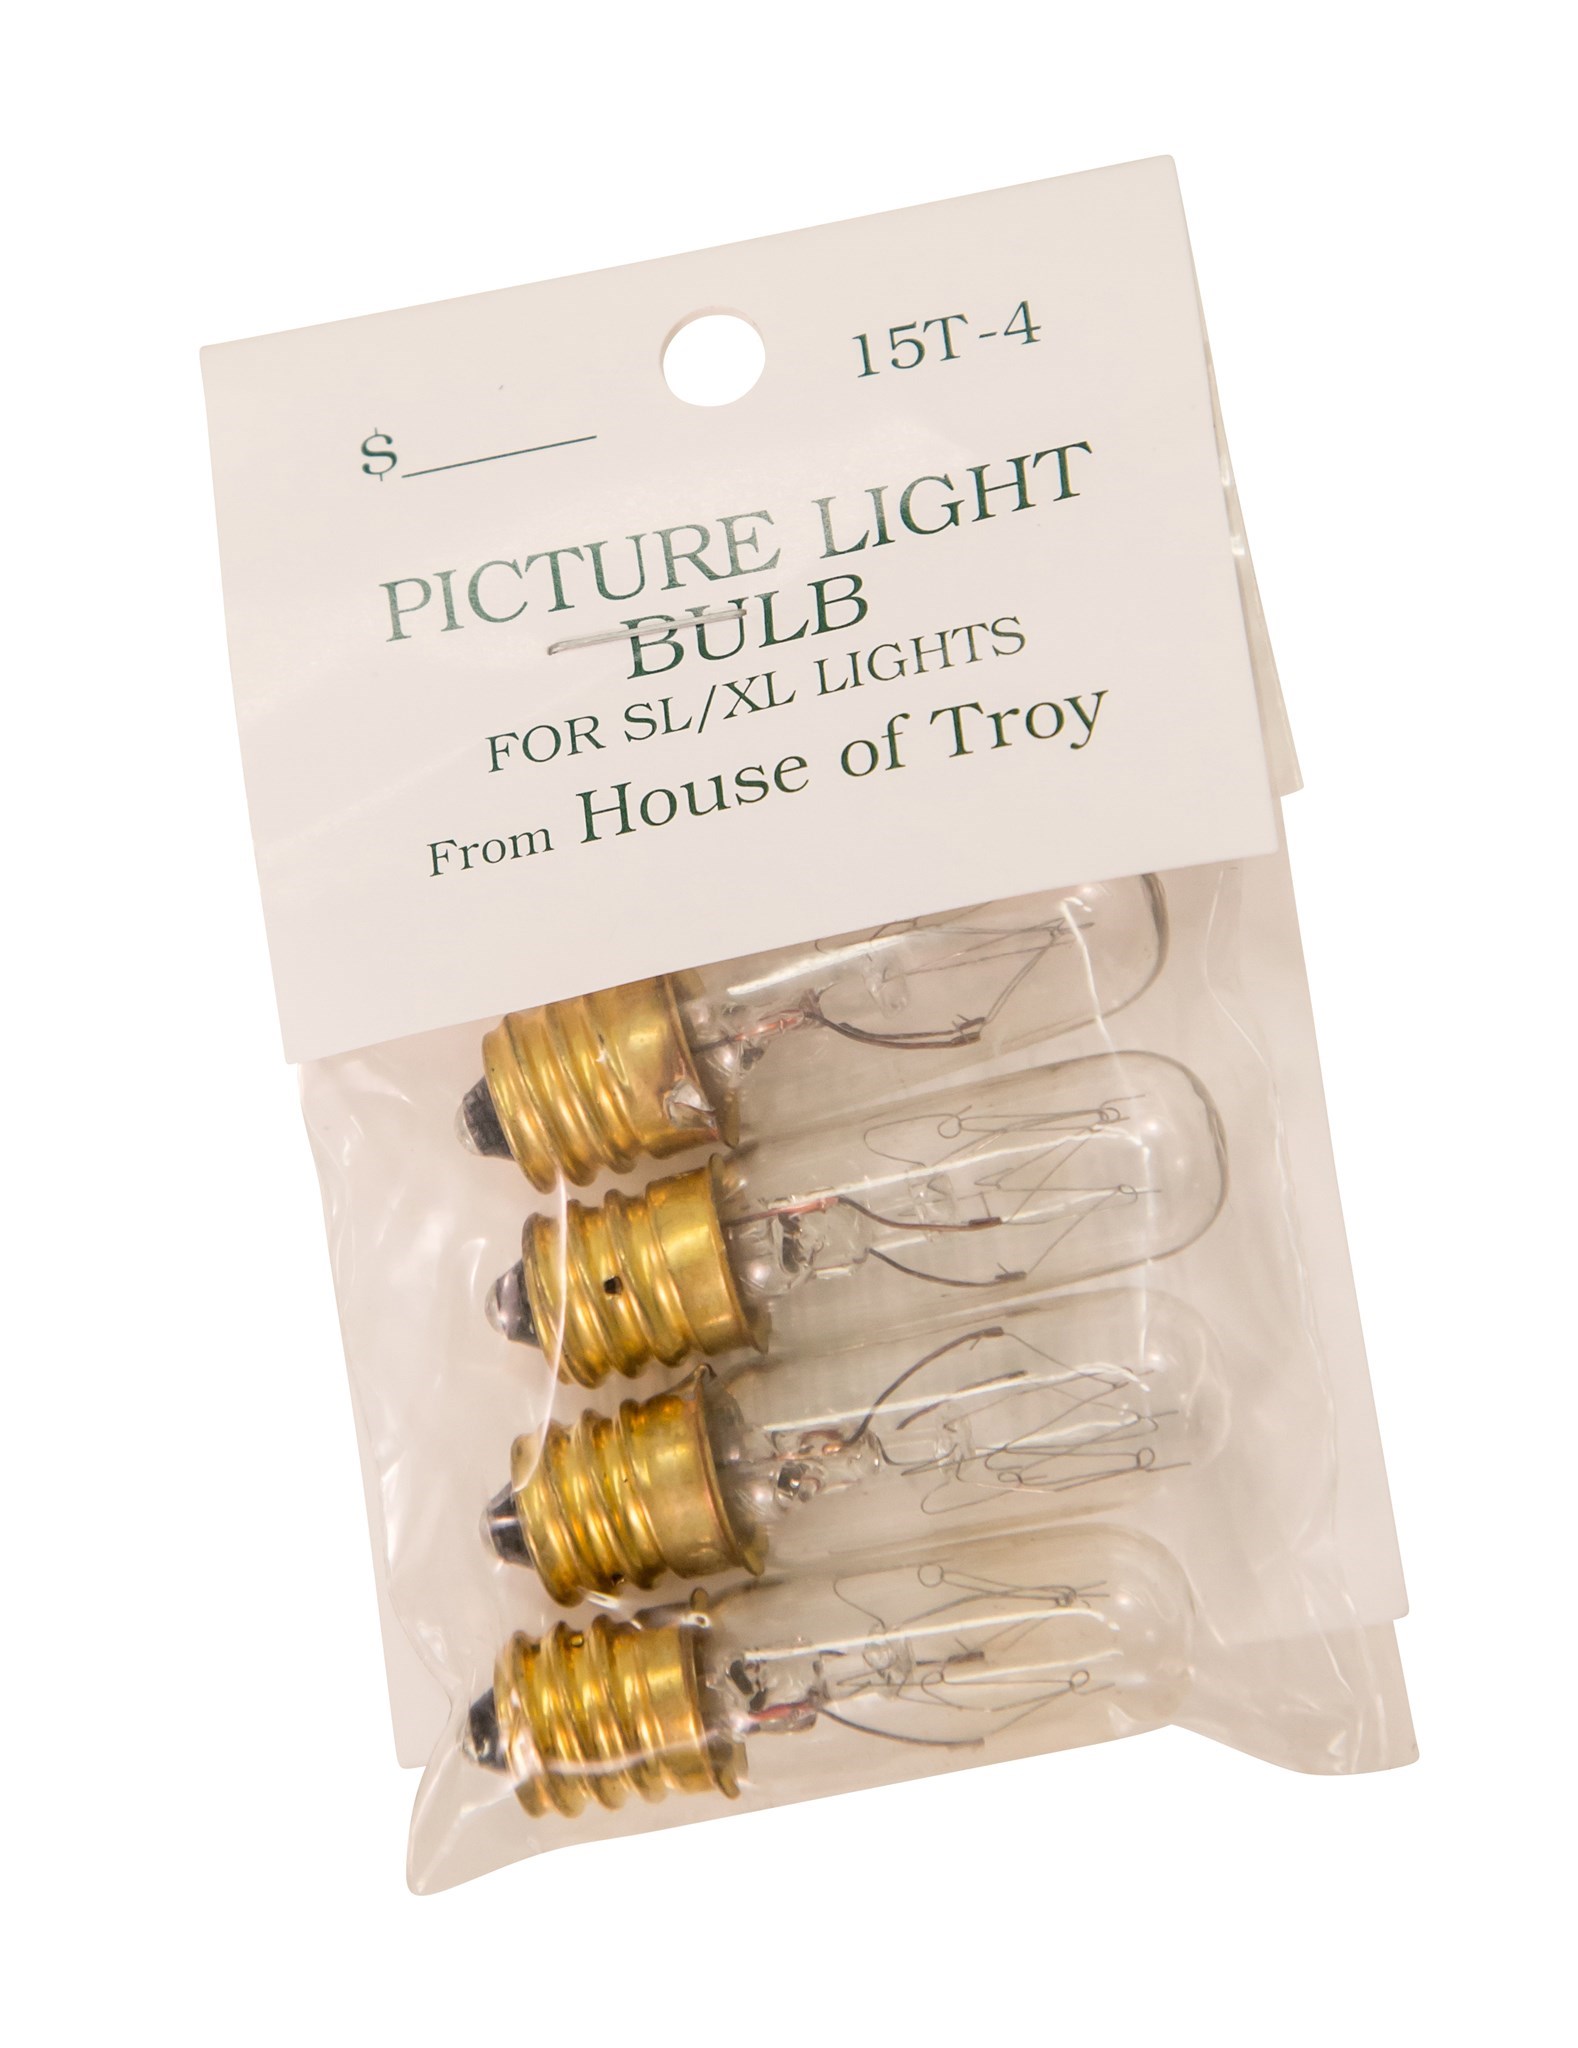 Bulb 15t4 Bag Bulbs And Accessories, House Of Troy Picture Light Bulb 15t 4